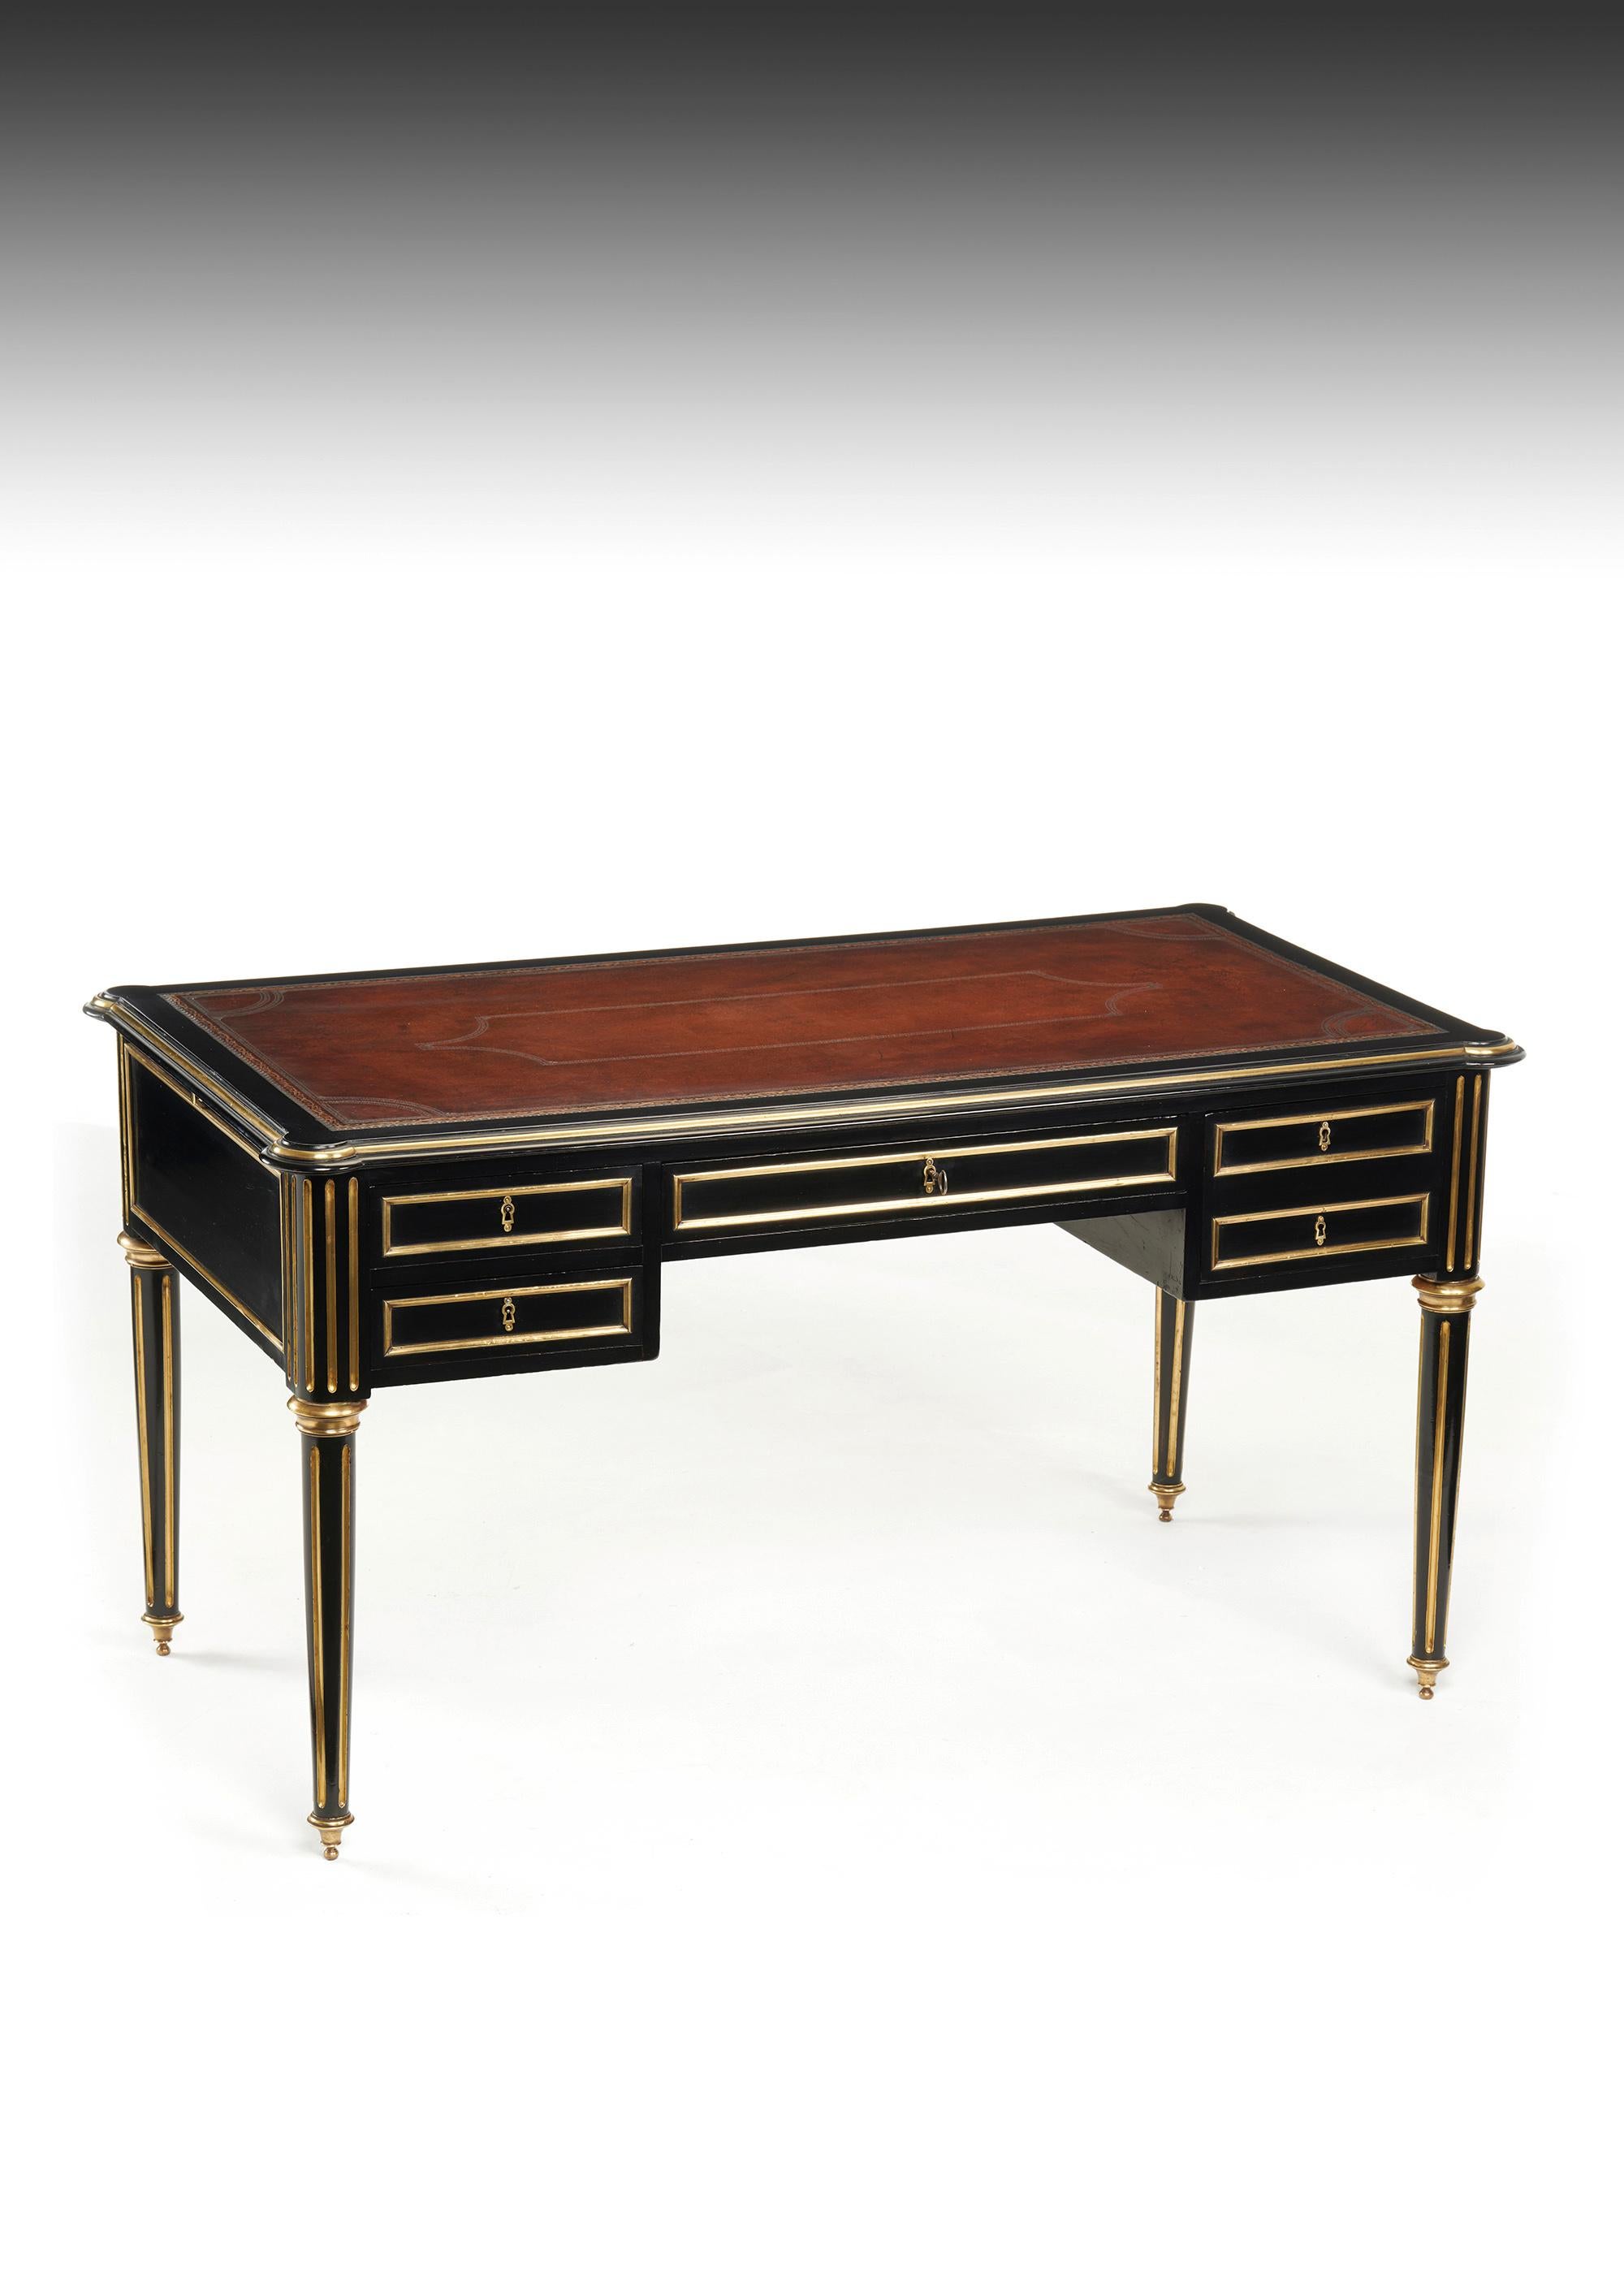 A stunning ebonised and brass mounted French writing table / desk in the style of Louis XVI with lobed corners most probably made by a Parisian Cabinet Maker.

French, circa 1880.

This fine quality antique desk also can be known as a bureau